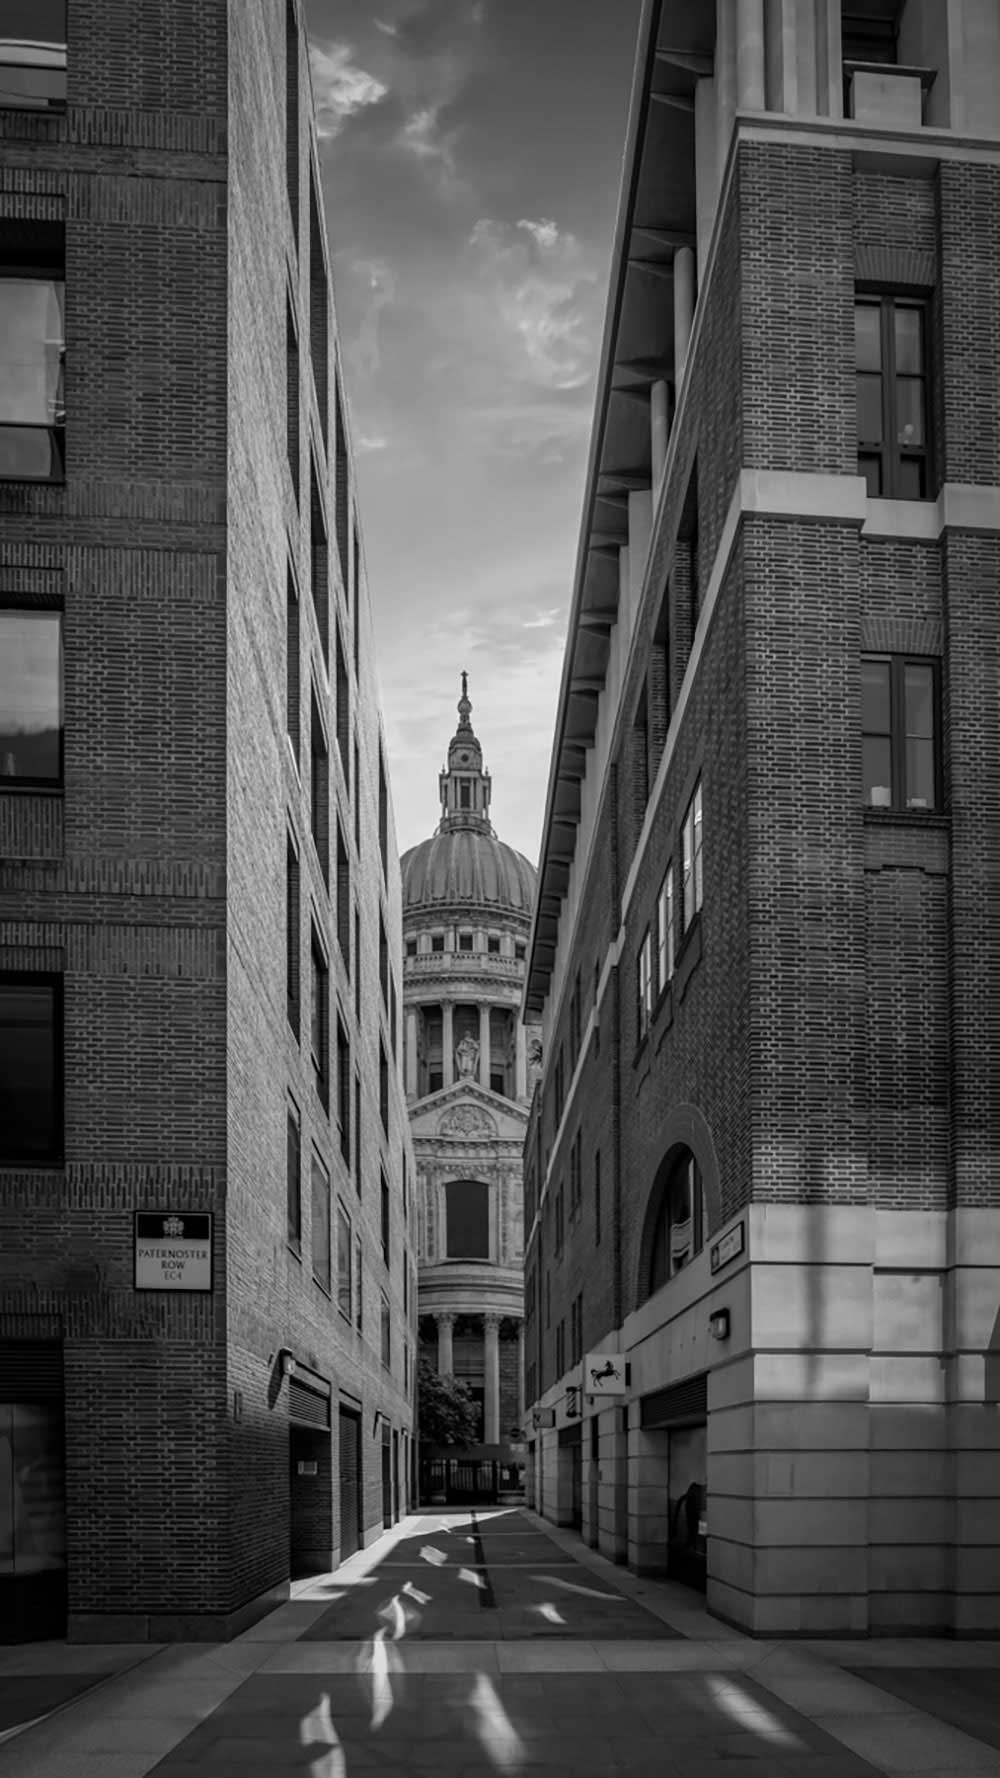 Cities : London in Black and White by Rene Siebring